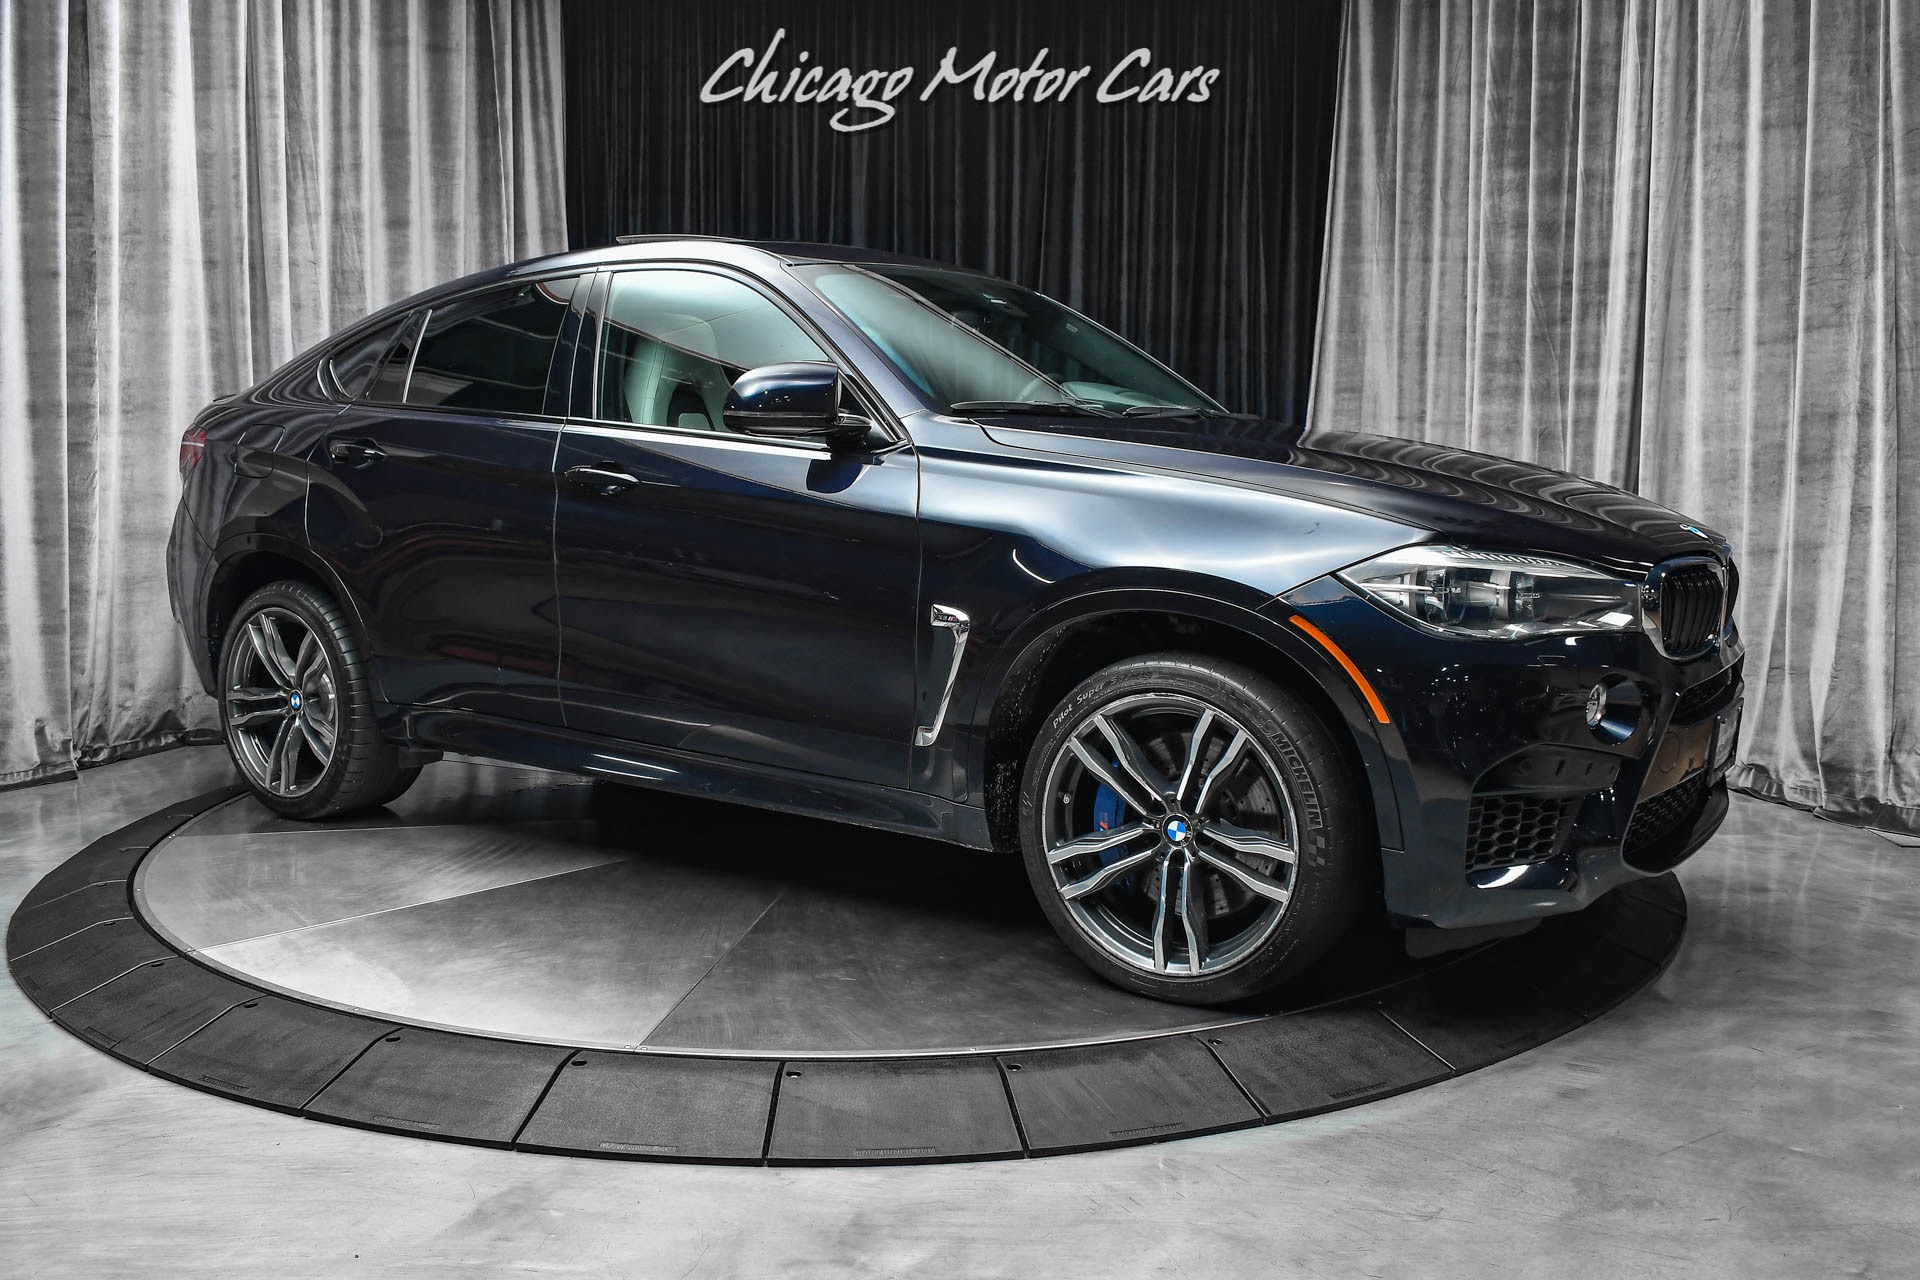 Used-2016-BMW-X6-M-SUV-MSRP-117k-Rear-Entertainment-Executive-Package-LOADED